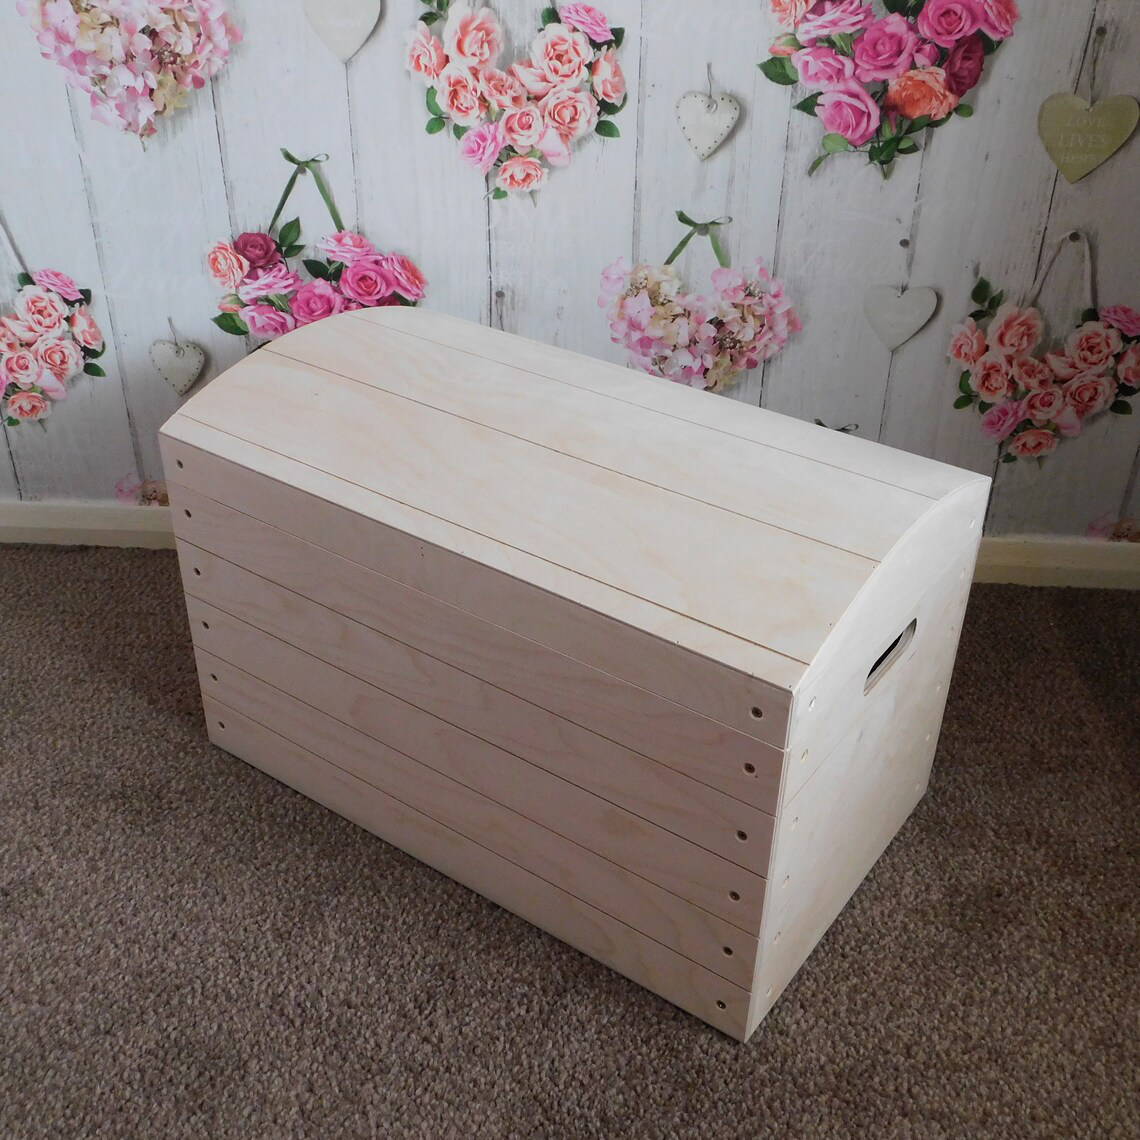 Large Wooden Storage Box with Curved Lid and Handles - General View